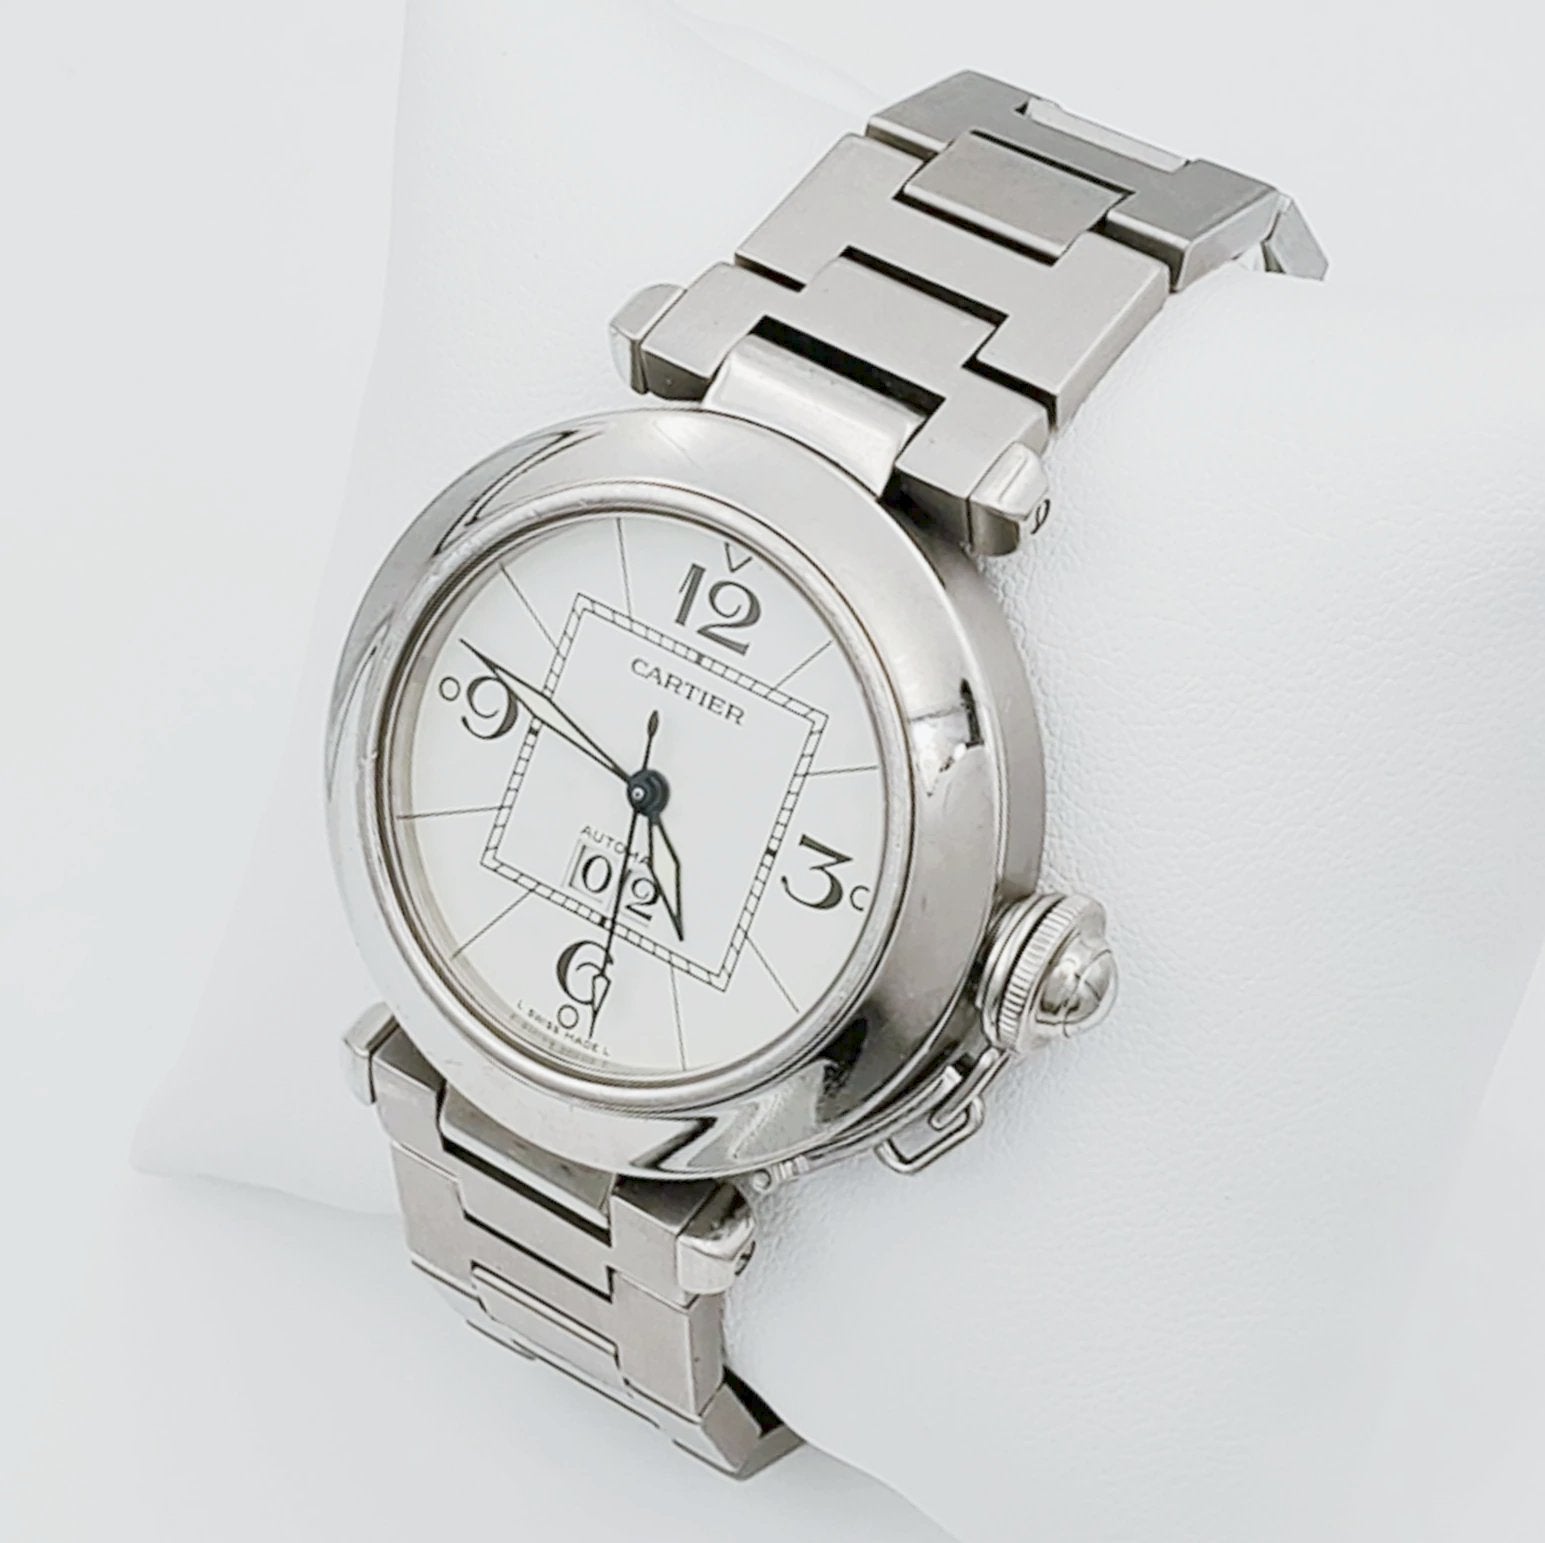 Women's Medium 36mm Cartier Pasha Watch with White Dial in Matte Stainless Steel. (Pre-Owned)